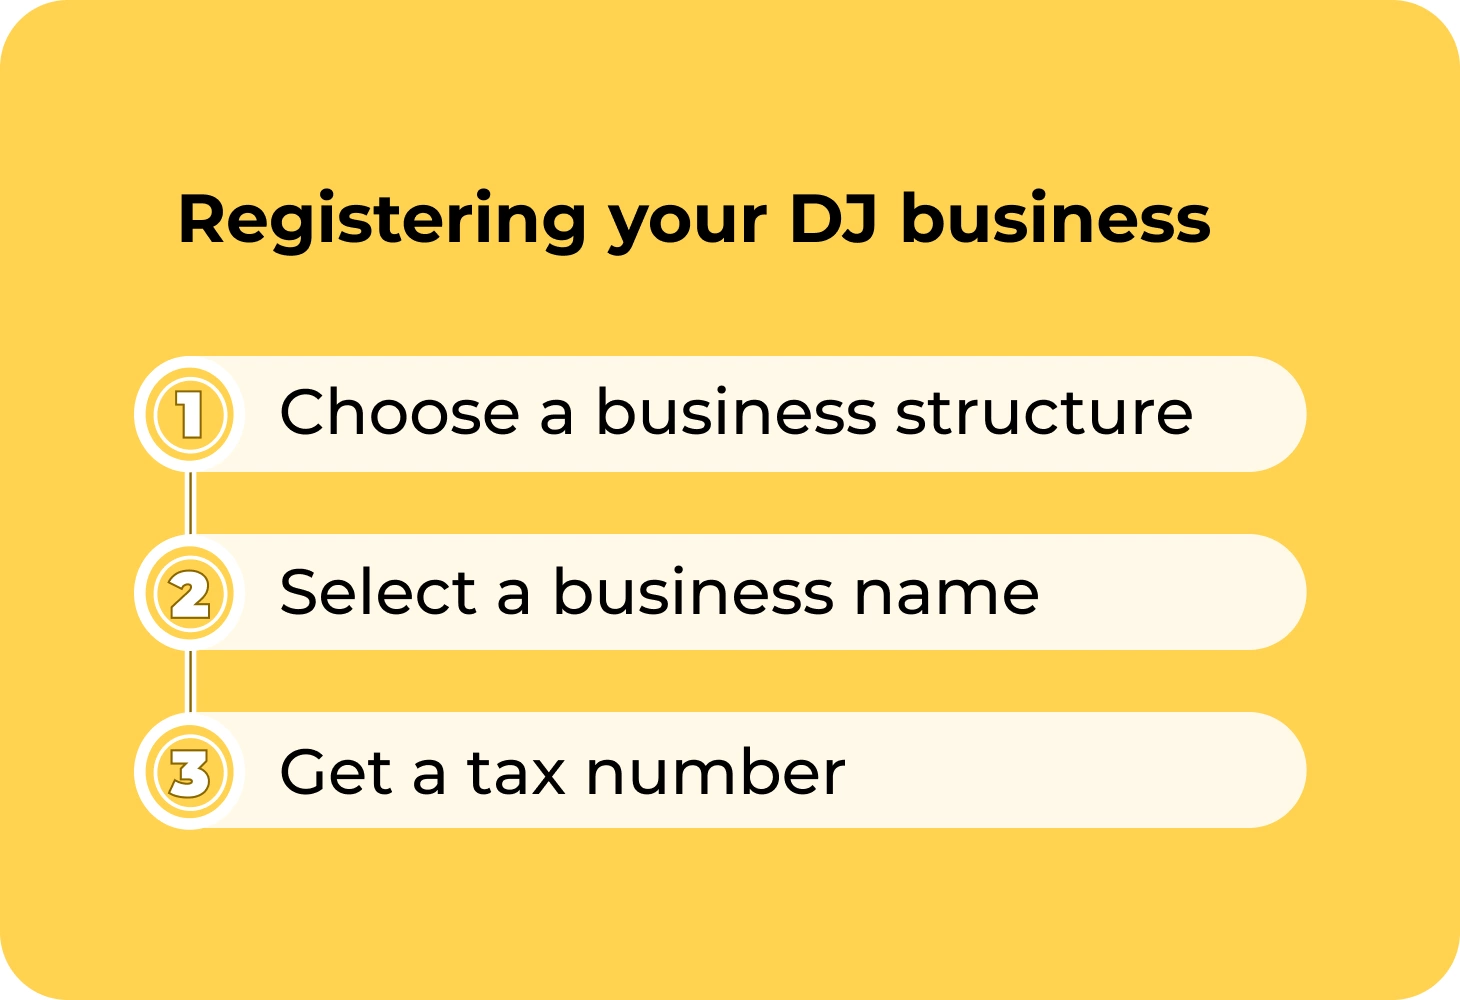 Make your DJ business official